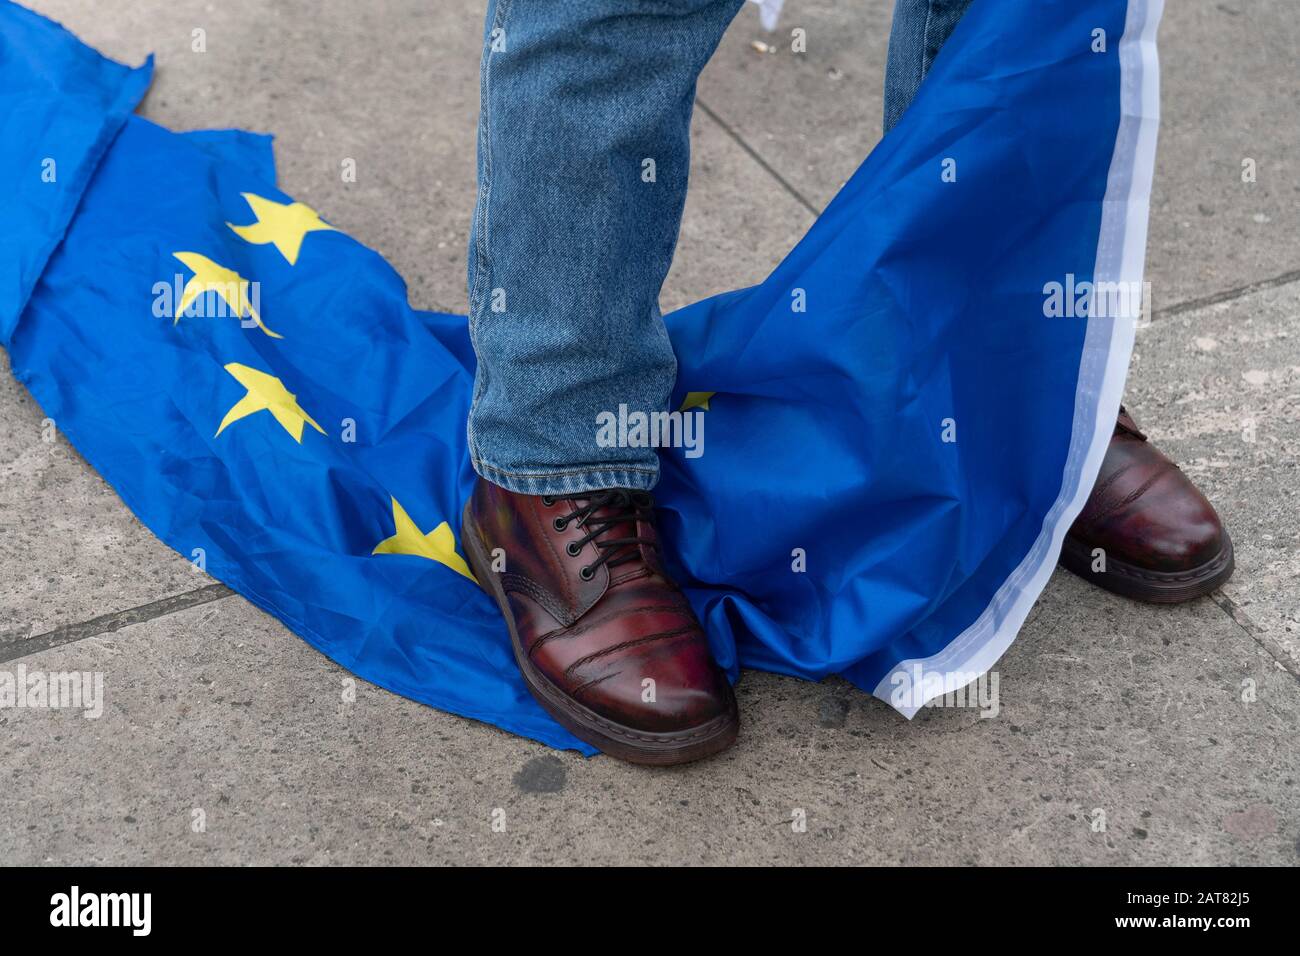 London, UK 31 January 2020. A Pro-Brexit campaigner standing on a European Union Flag at Parliament Square on the day Britain officially leaves the EU Stock Photo